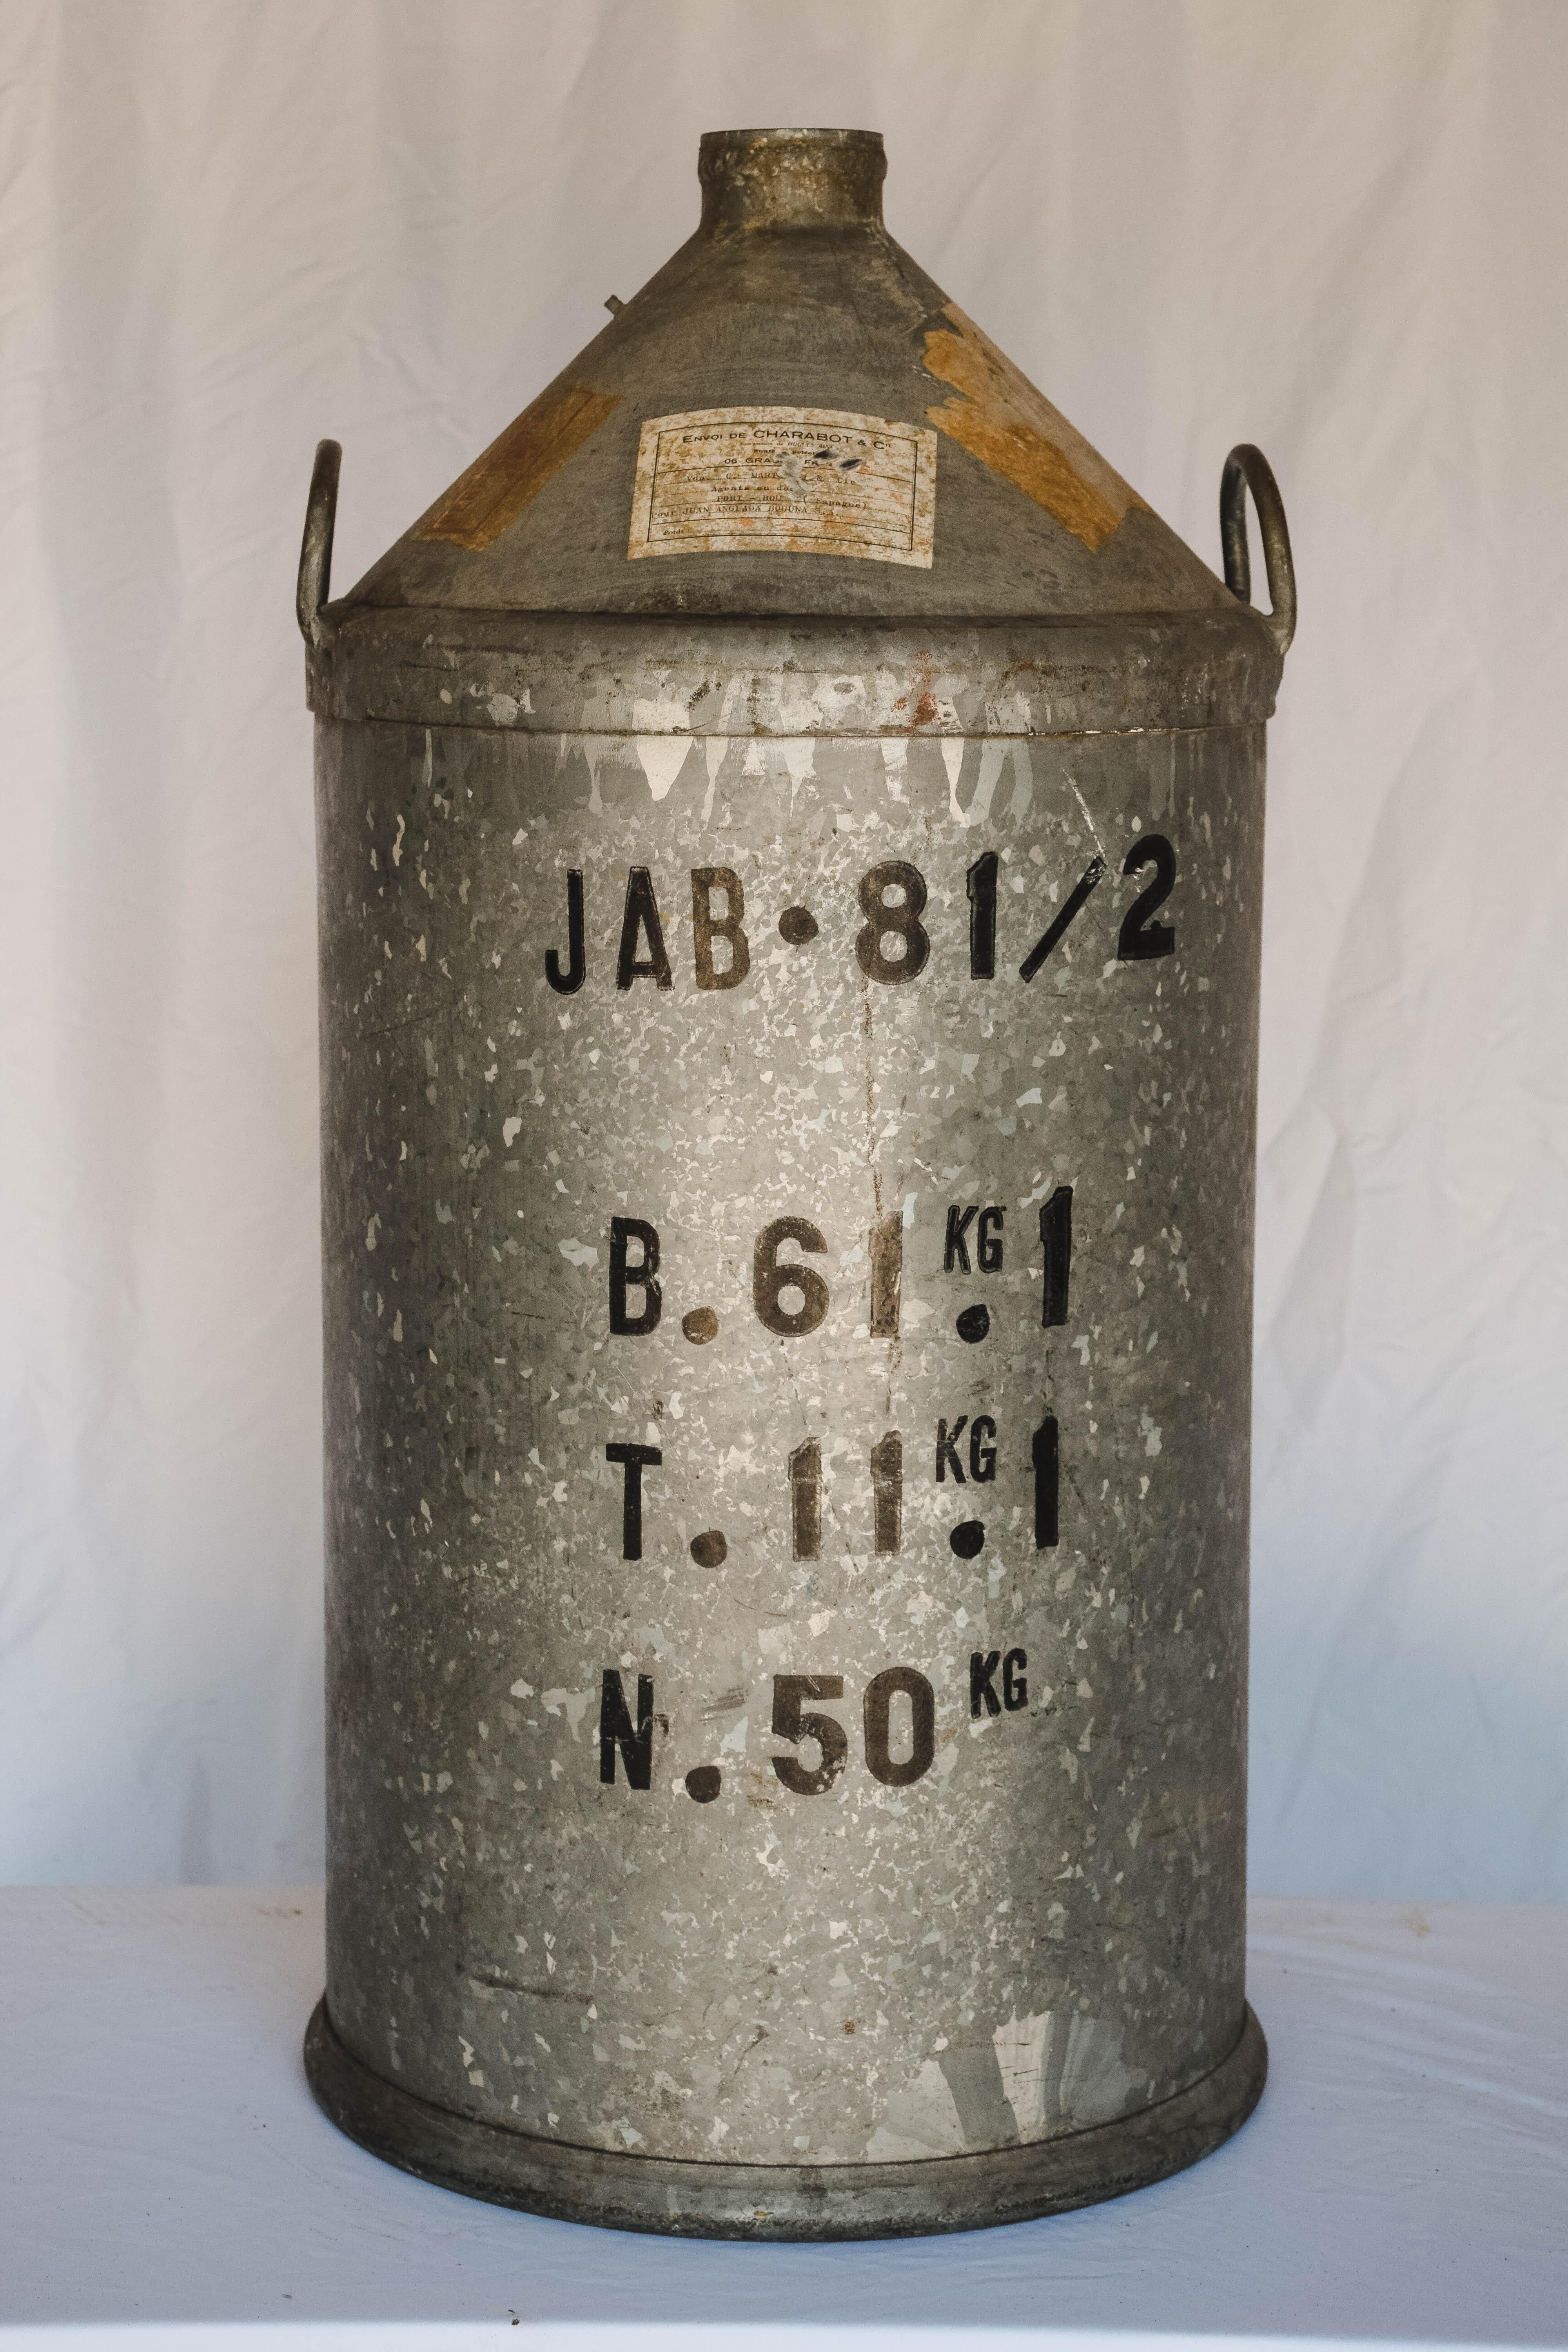 The Charabot perfume company is the oldest perfume company, still active today. This transport canister is very decorative alone or displaying foliage.